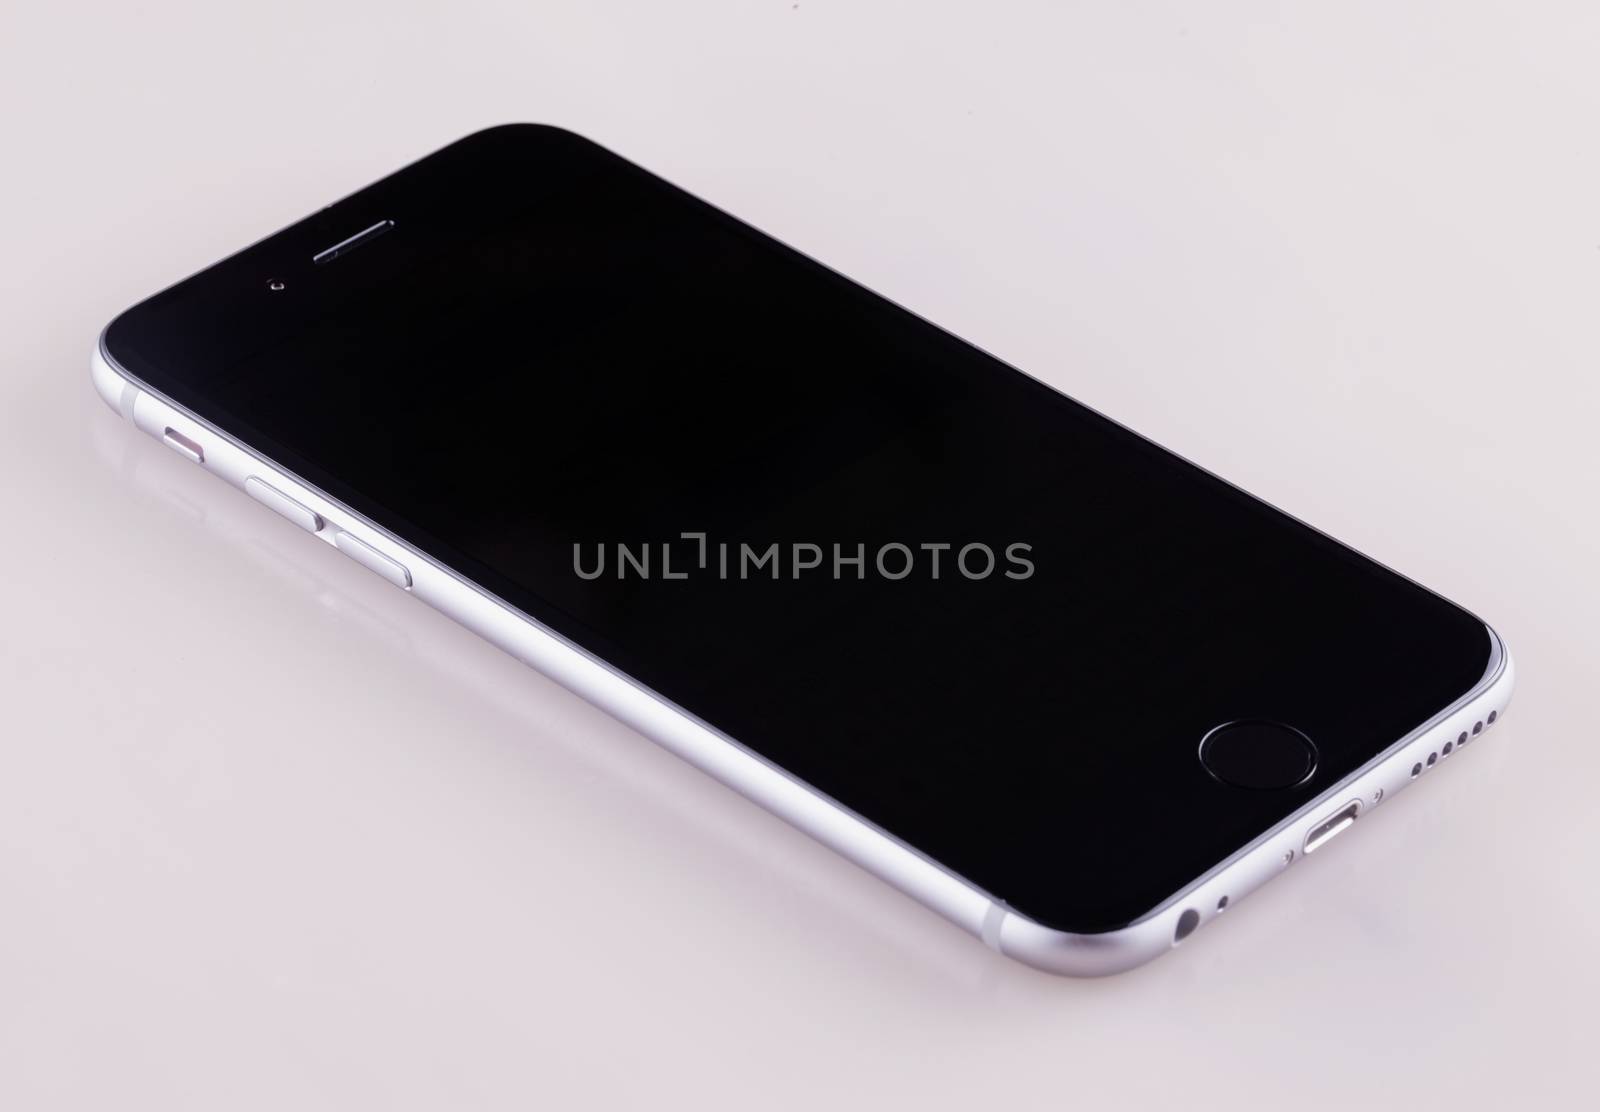 CASALE MONFERRATO, ITALY - NOVEMBER 28, 2014: Apple iPhone 6, front view, lying on white background. iPhone 6 is the latest model of successful dynasty of smartphones